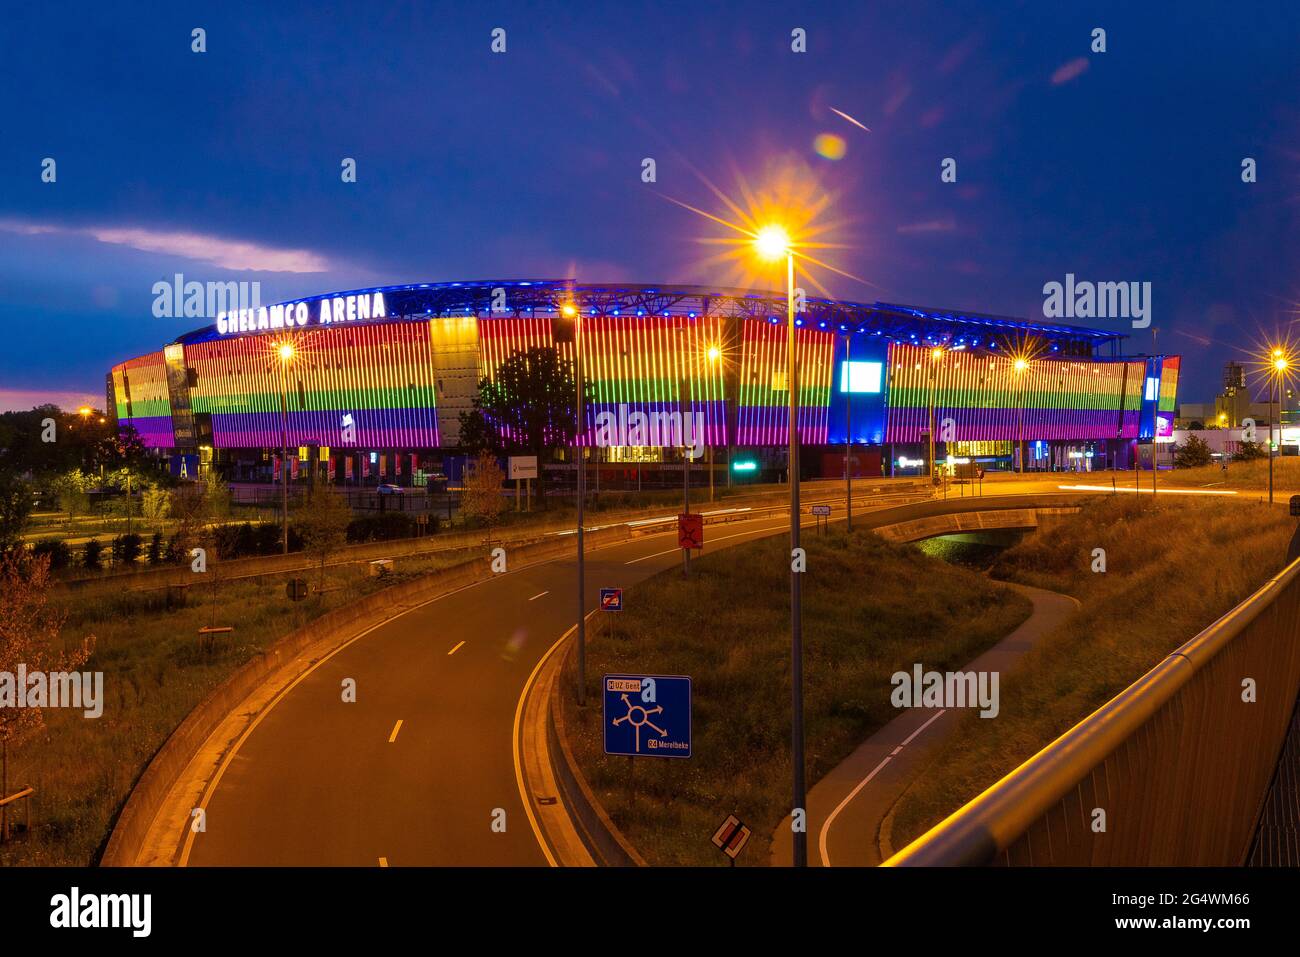 The Ghelamco Arena, home base of Jupiler Pro League first division soccer team KAA Gent is covered in rainbow lights, Wednesday 23 June 2021 in Gent. Stock Photo